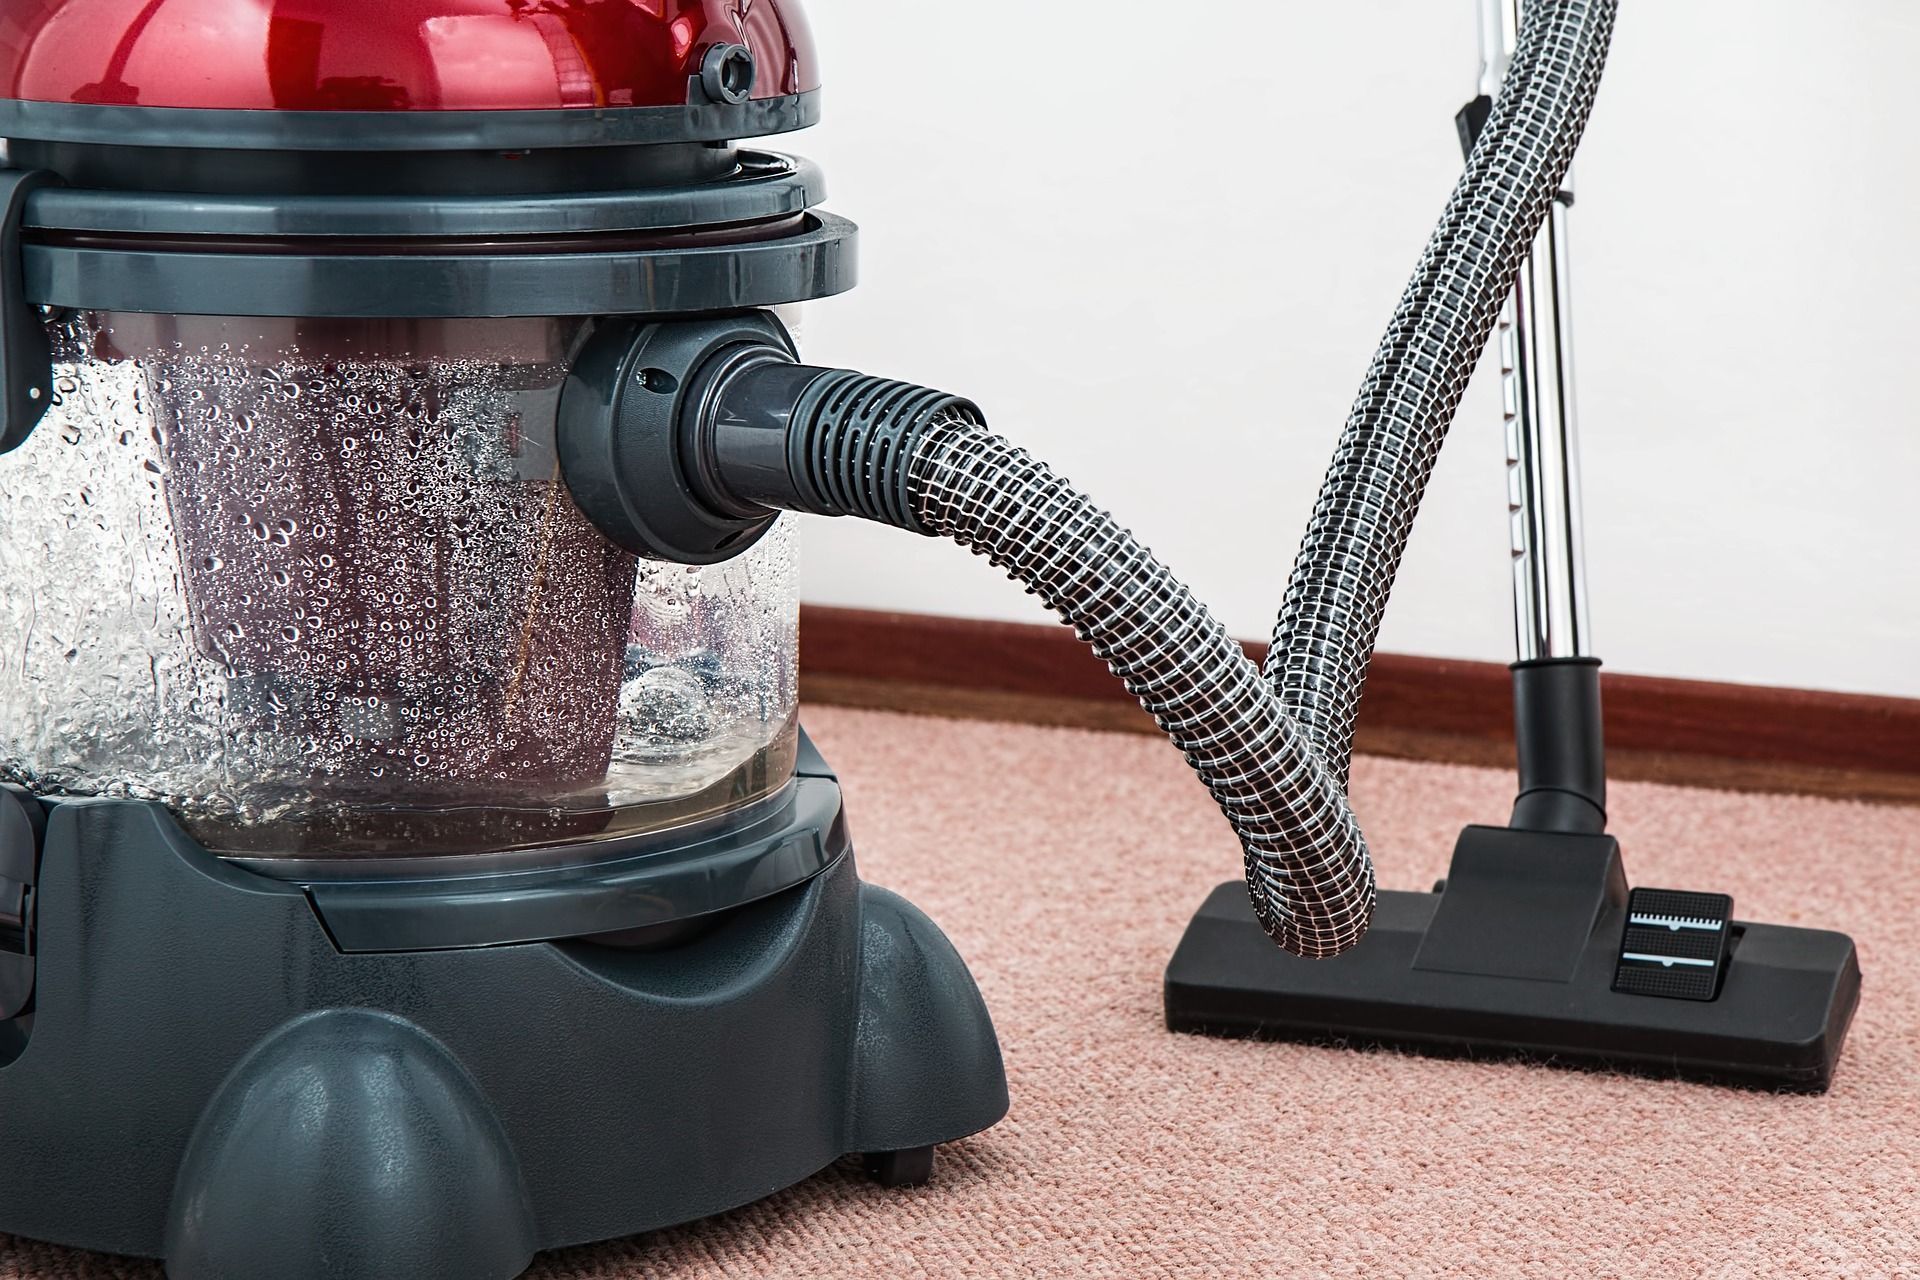 Have You Cleaned Your Carpets Lately?